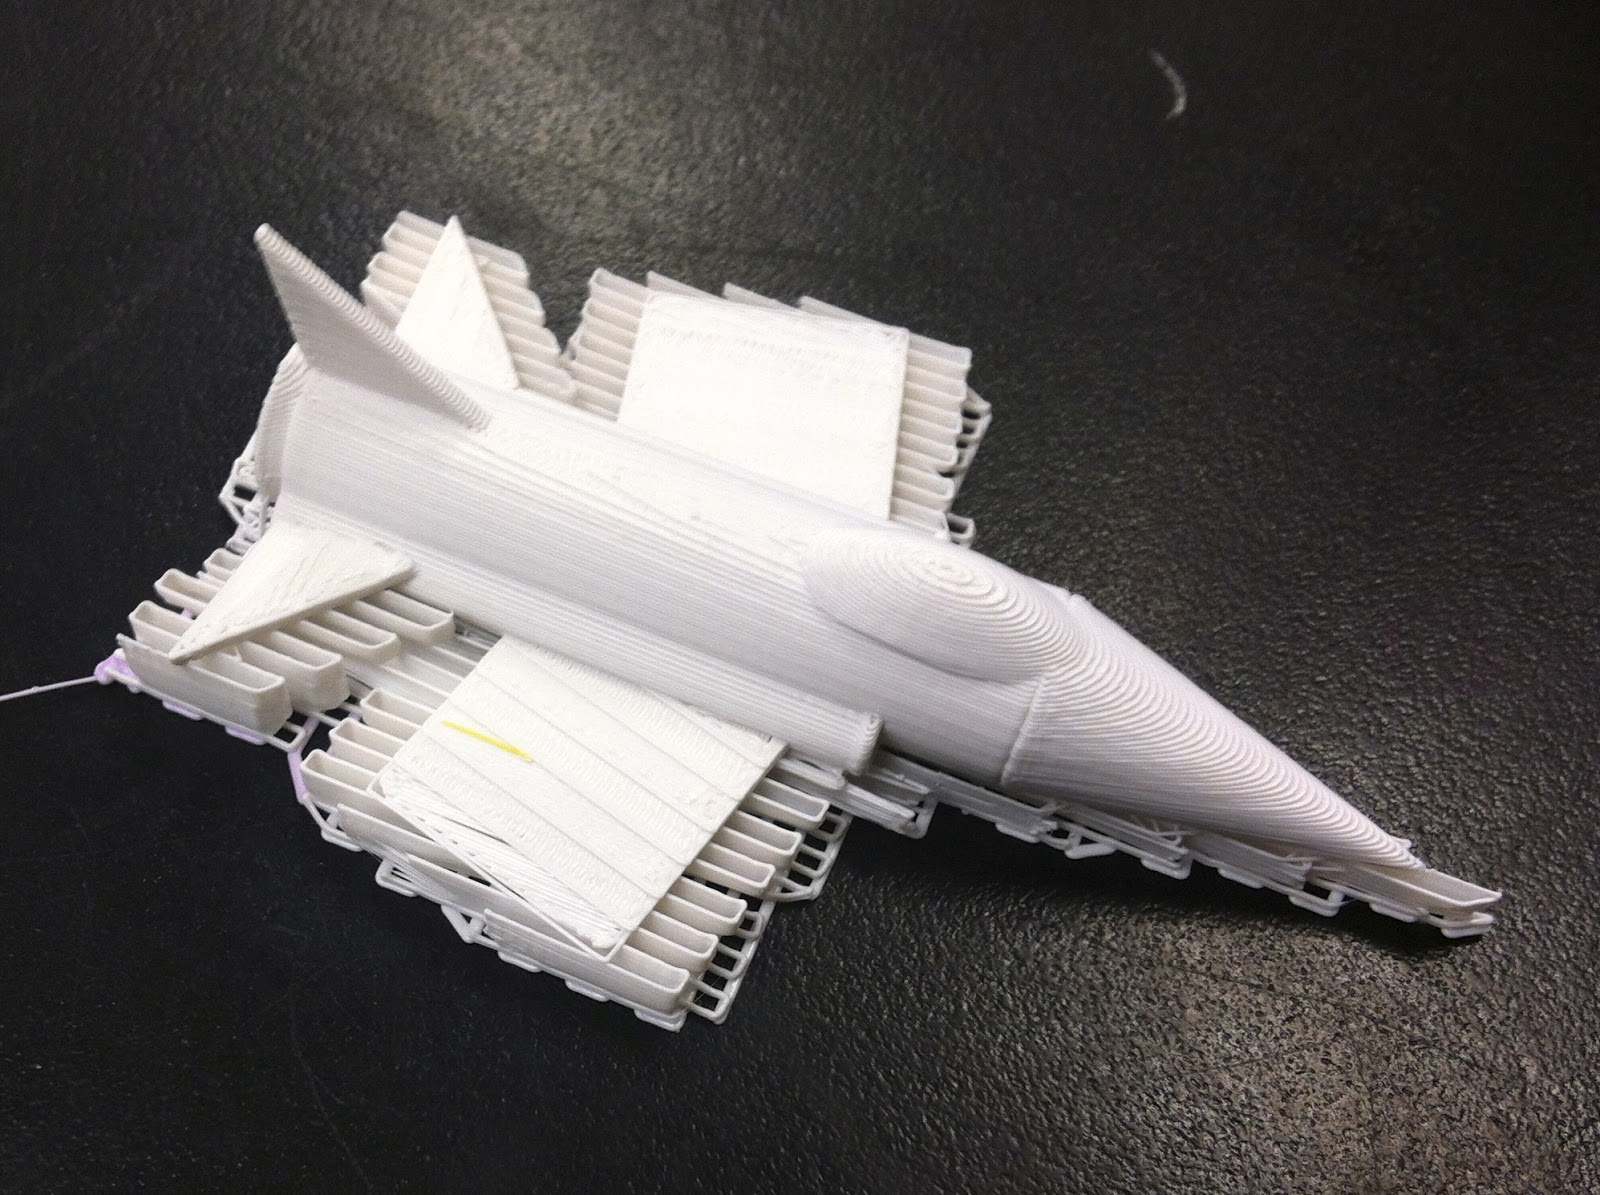 Tales of a 3D Printer: Kids designs are becoming the norm! - P7